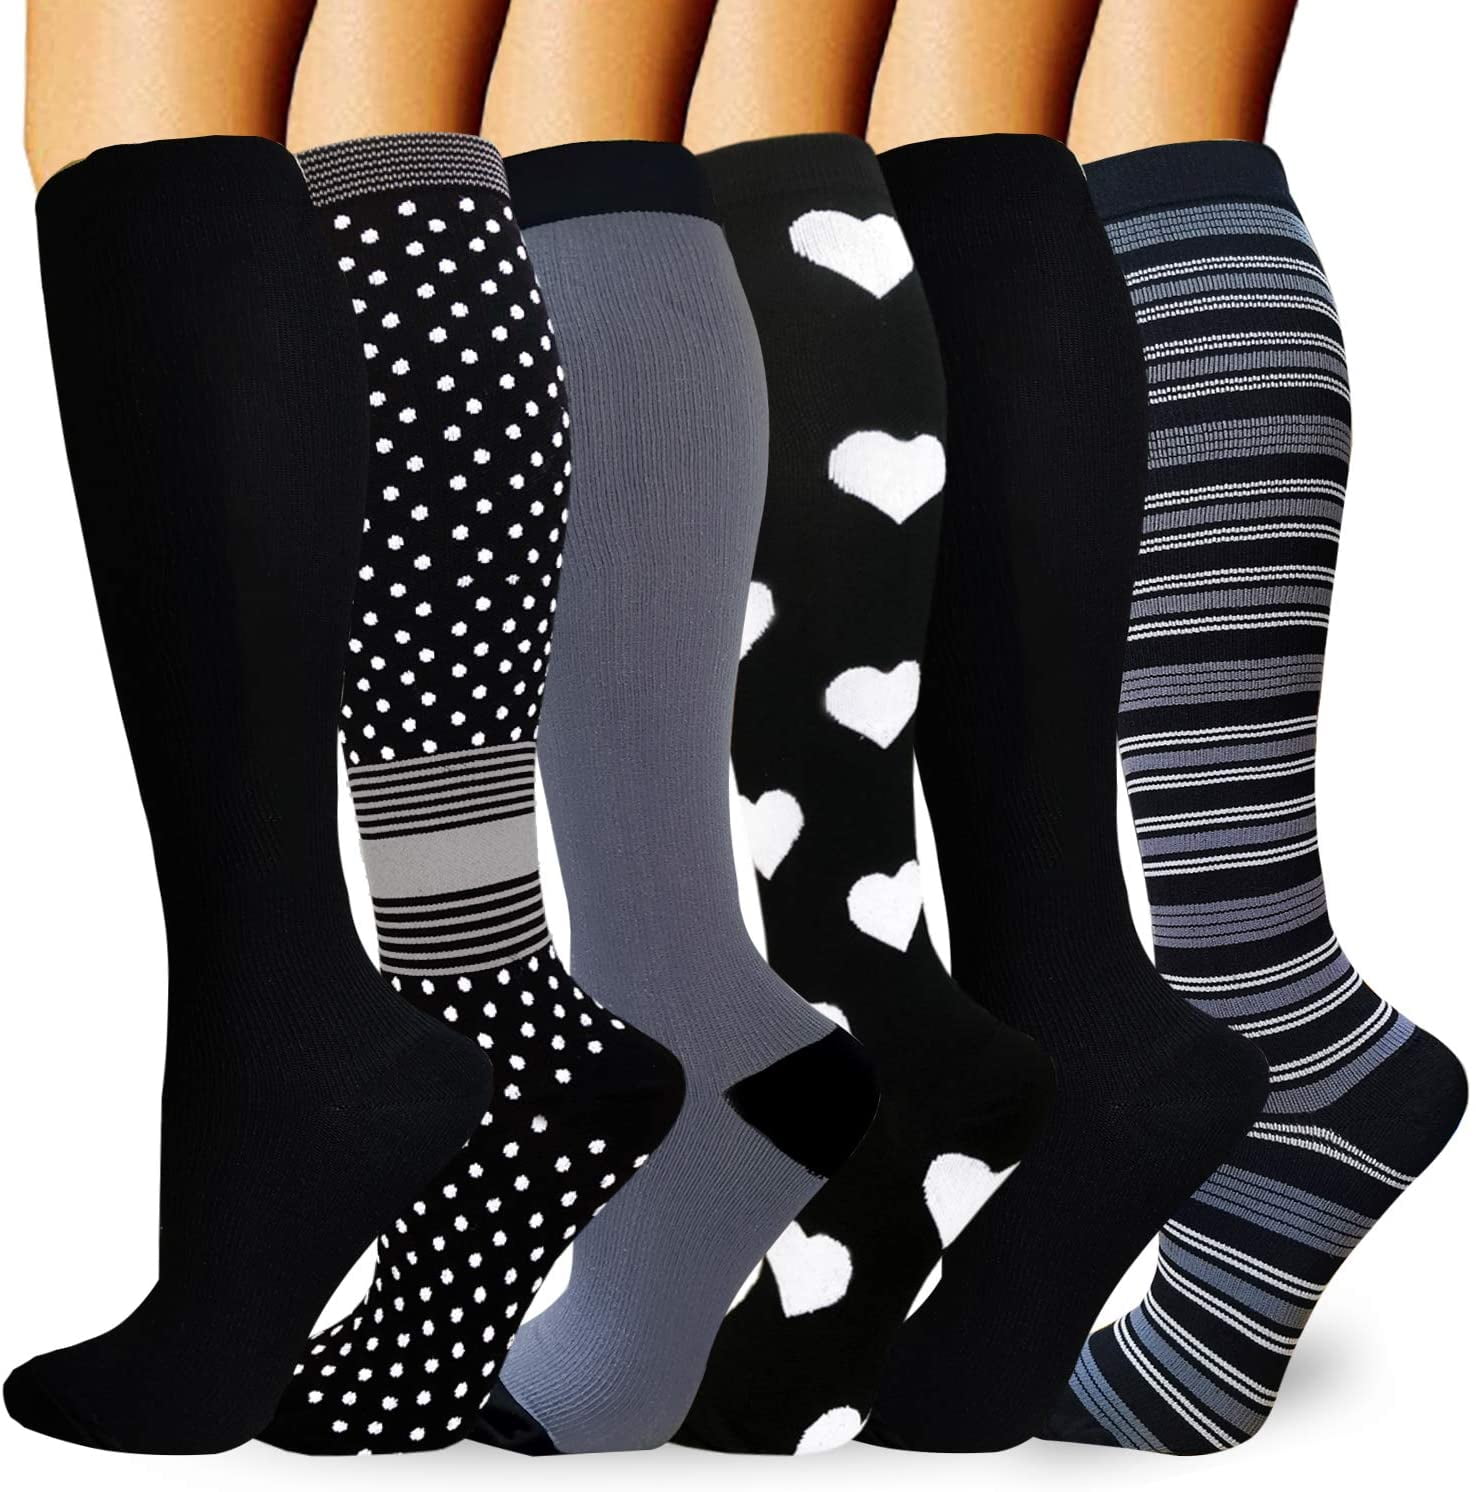 Calhnna Compression Socks For Men And Women 6 Pairs L Xl